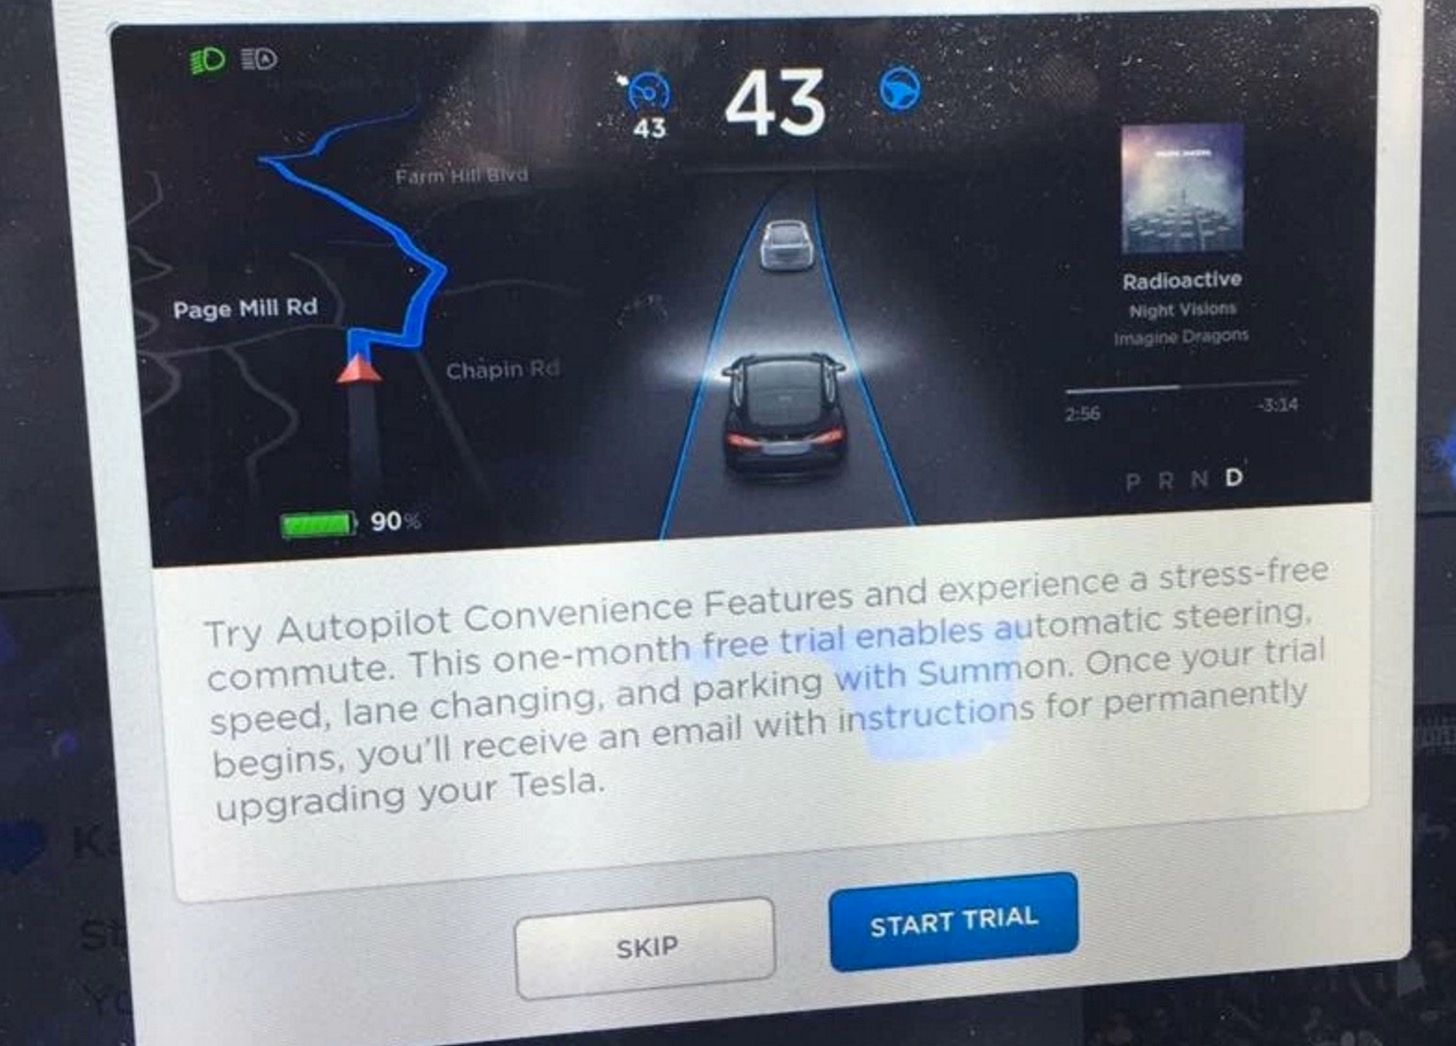 tesla now offers 1 month free autopilot trial to model s and x owners image 2